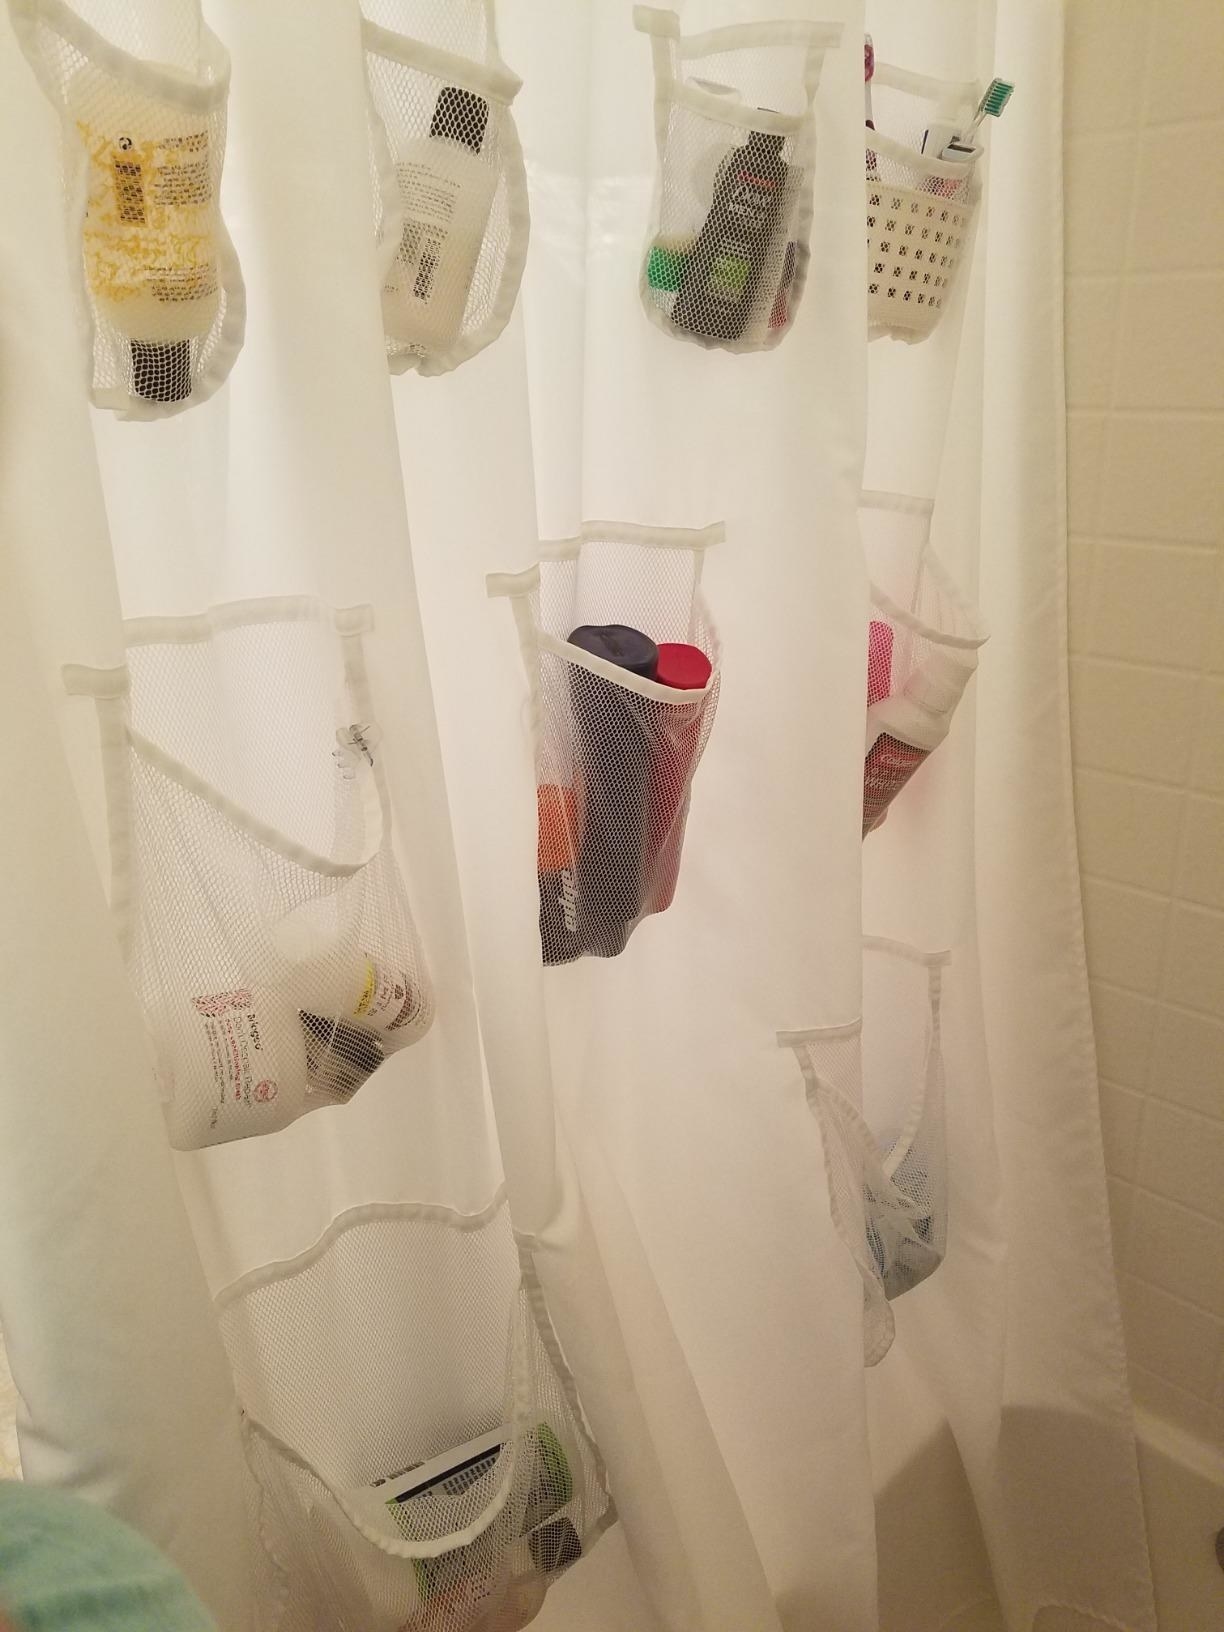 Shower curtain with pockets that are holding several bath products